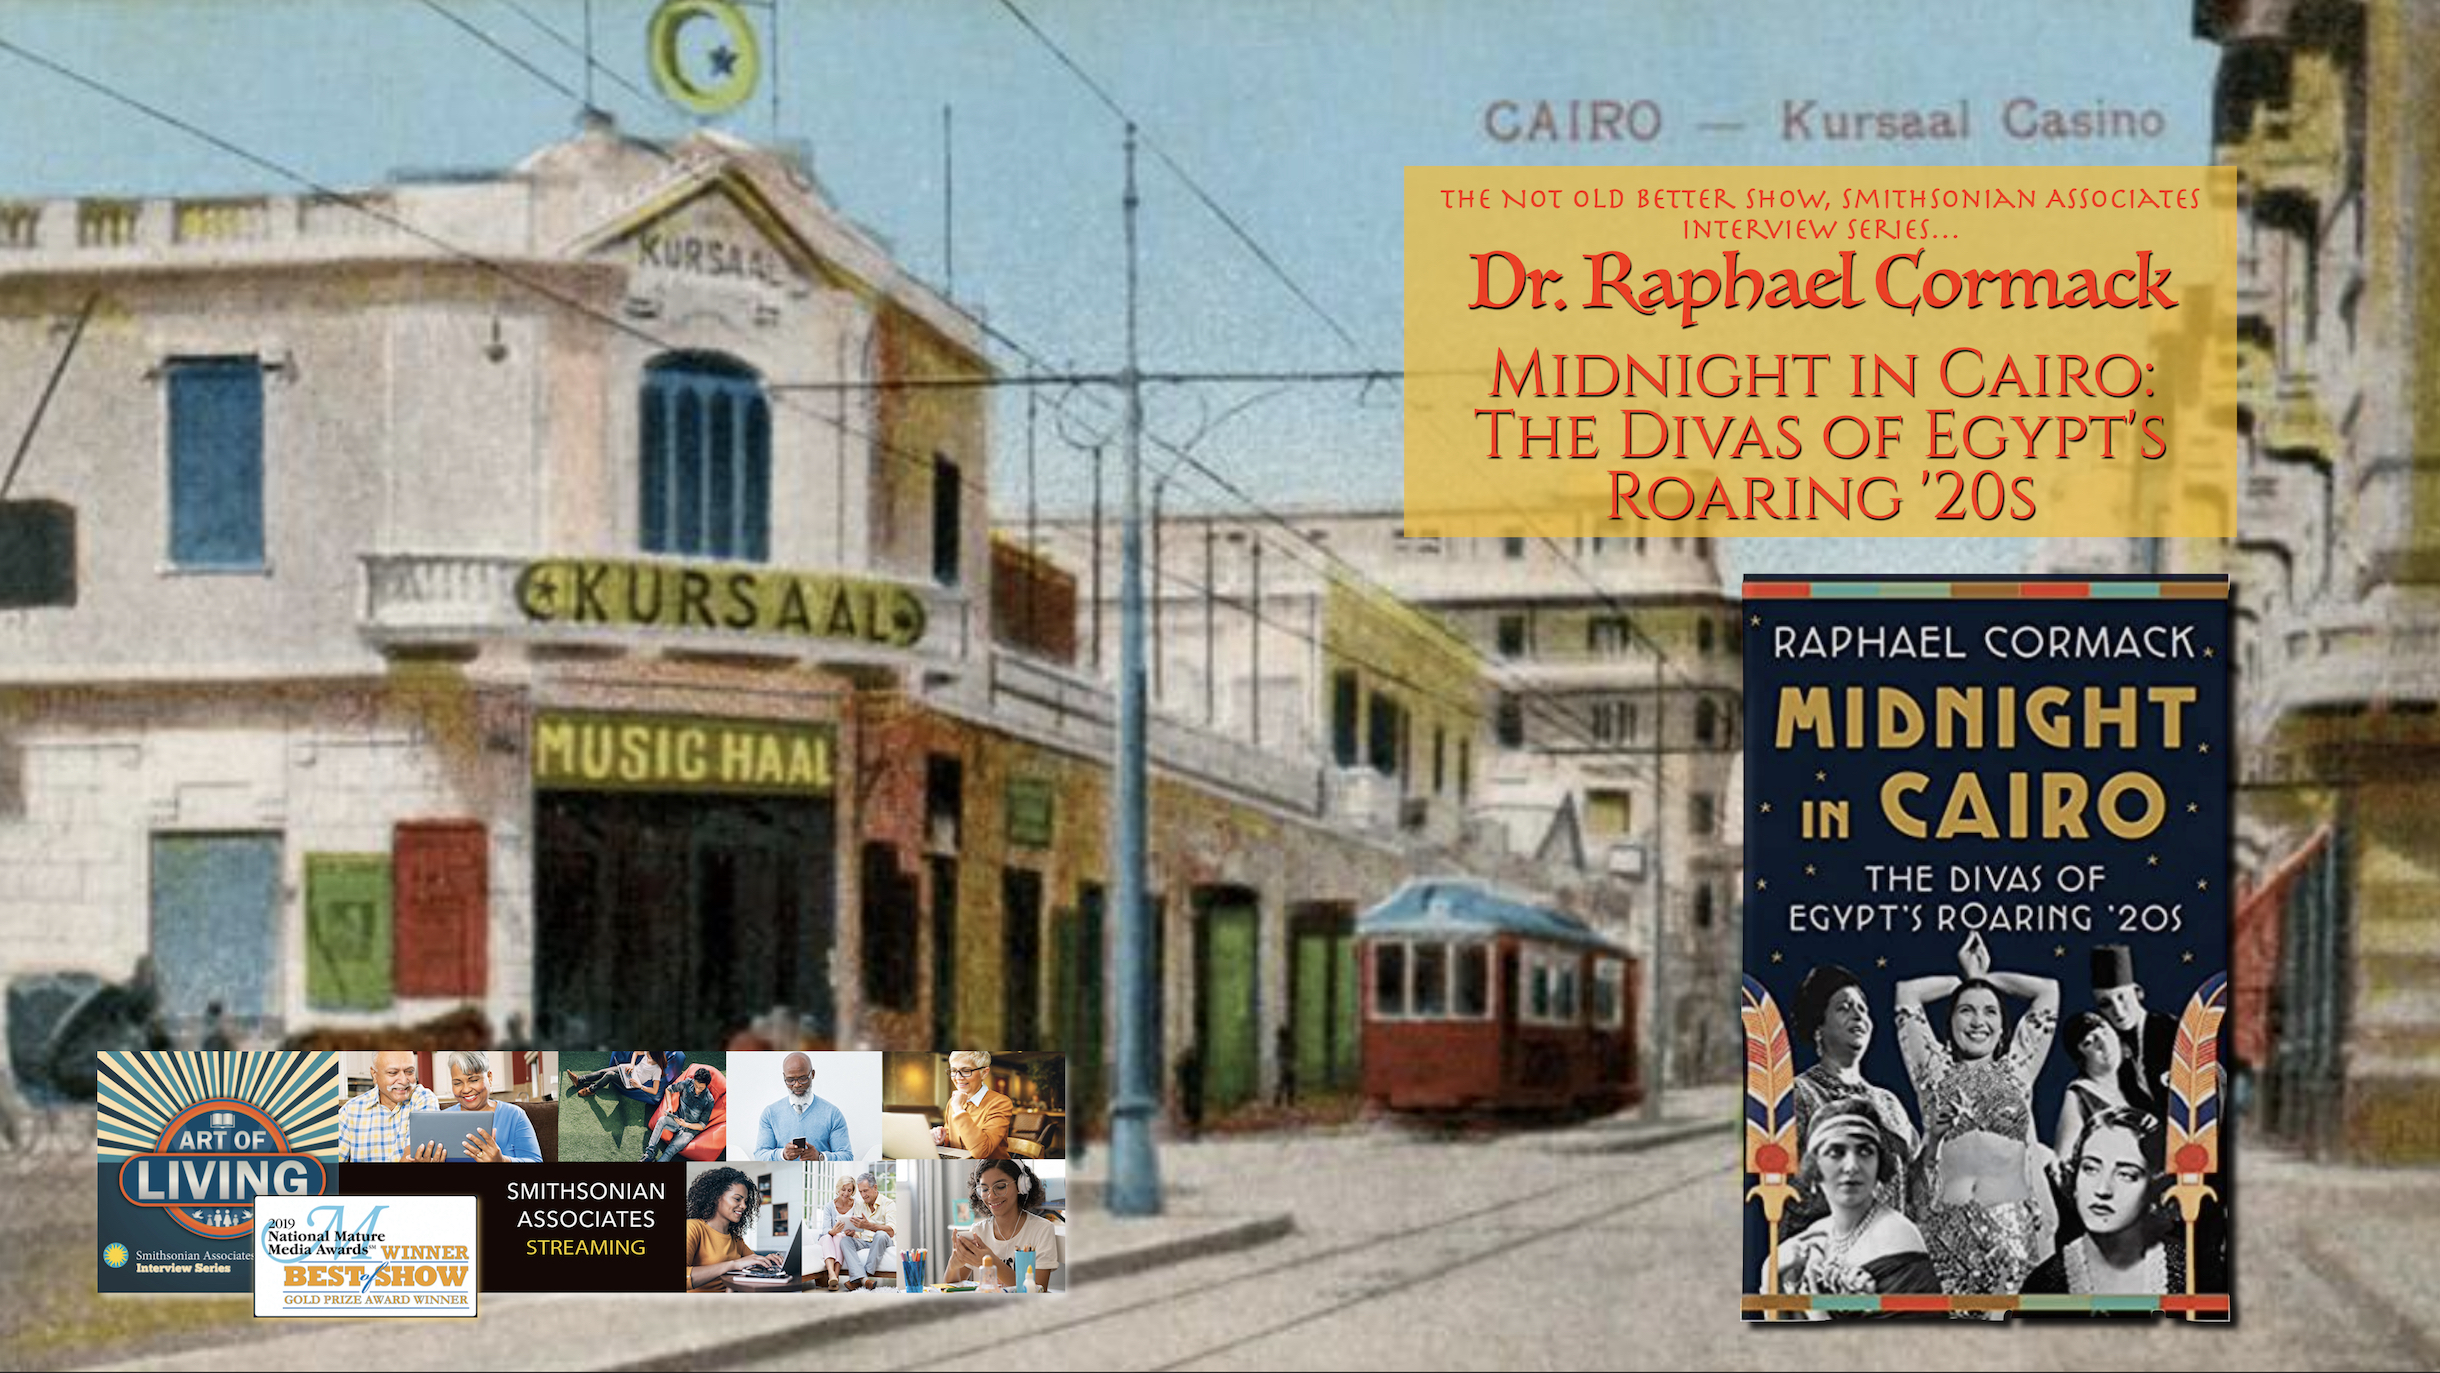 Midnight in Cairo: The Divas of Egypt’s Roaring ’20s – Dr. Raphael Cormack